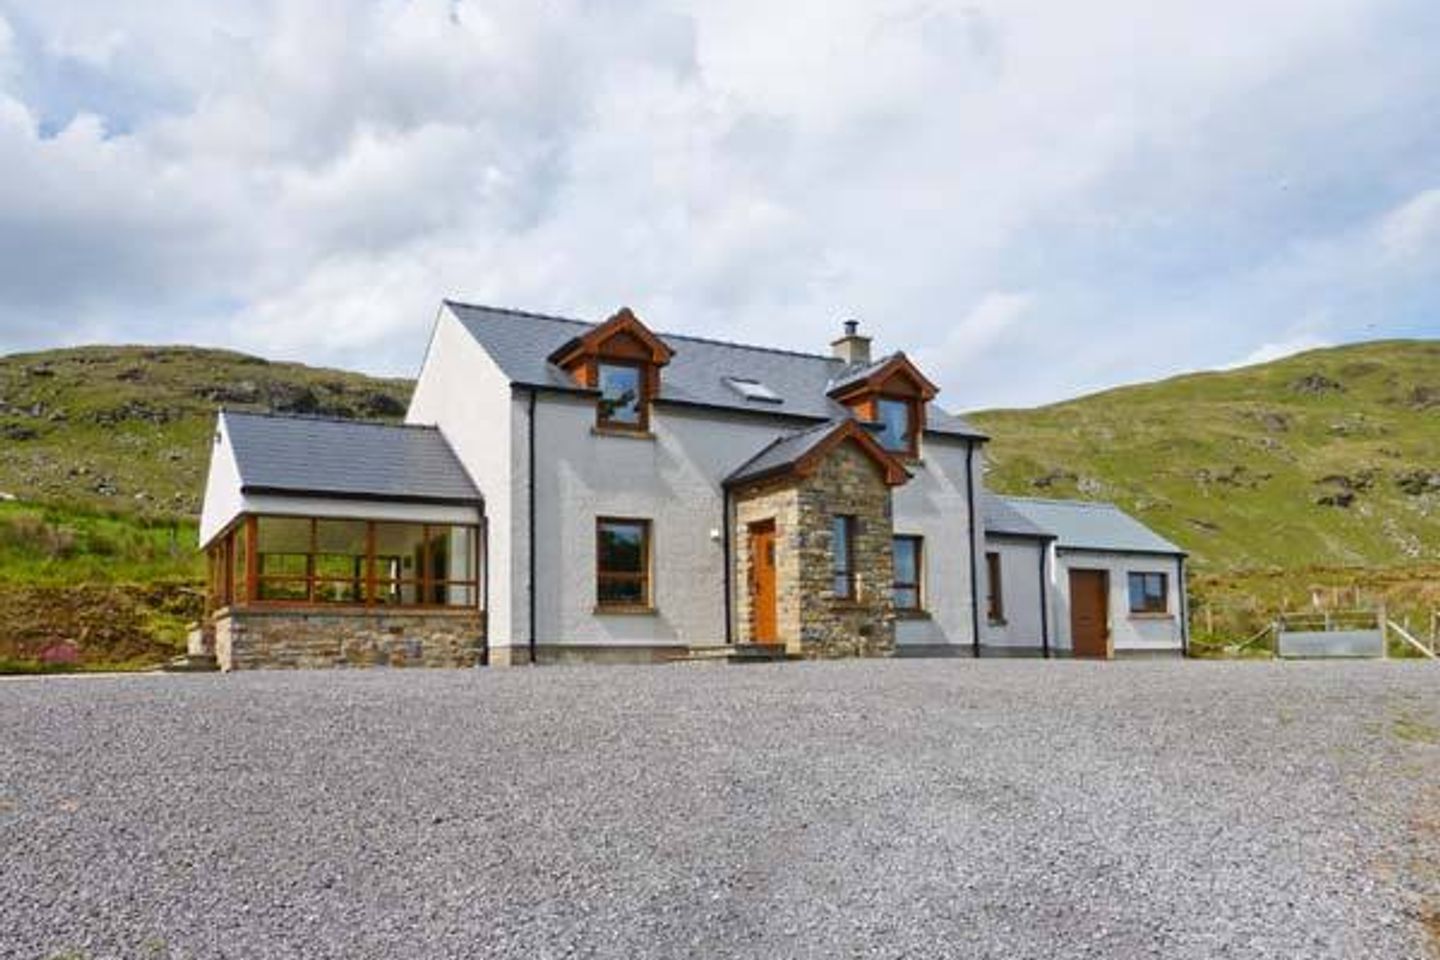 Ref. 906503 Blue Stack House, Meenaguish Beg, Donegal Town, Co. Donegal